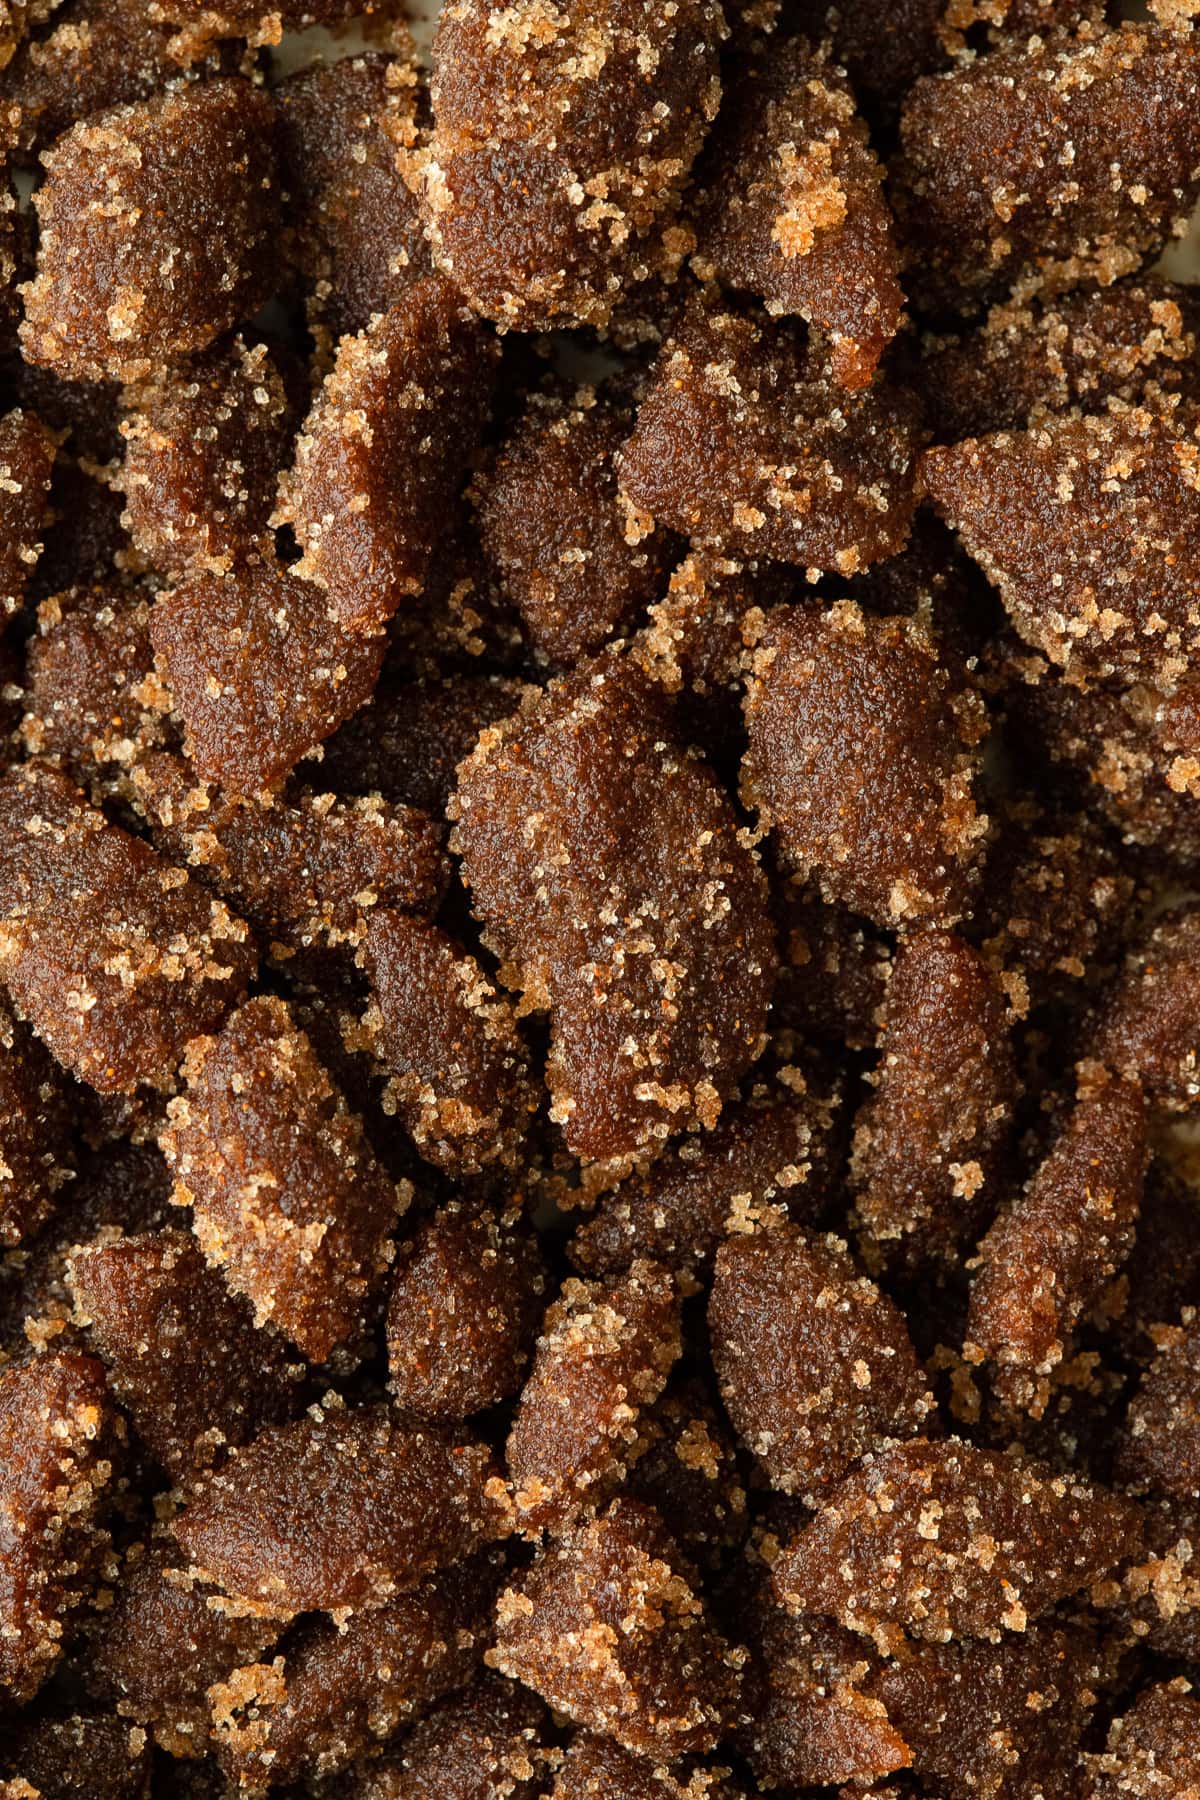 Close up of homemade cinnamon chips coated in cinnamon sugar.